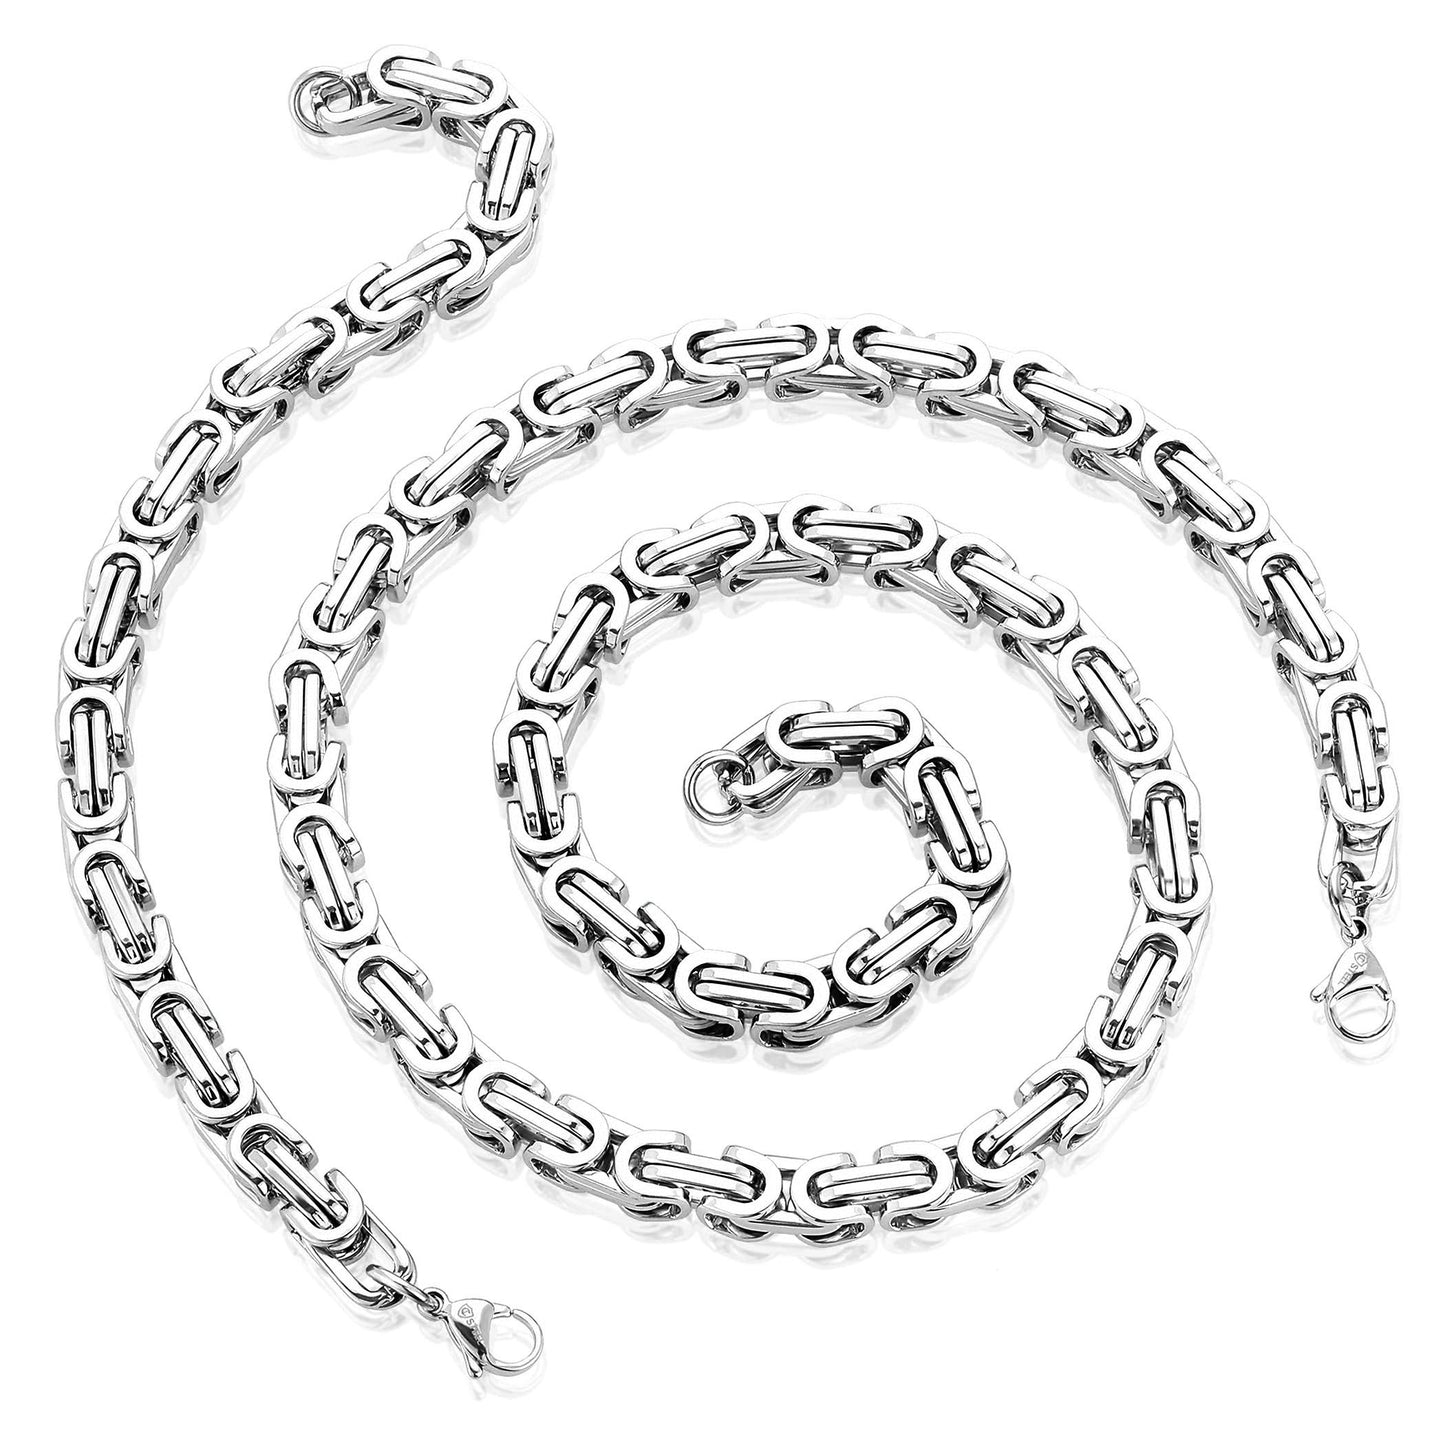 Men's Stainless Steel Byzantine Chain Necklace (24") and Bracelet (9") Set - (9mm)